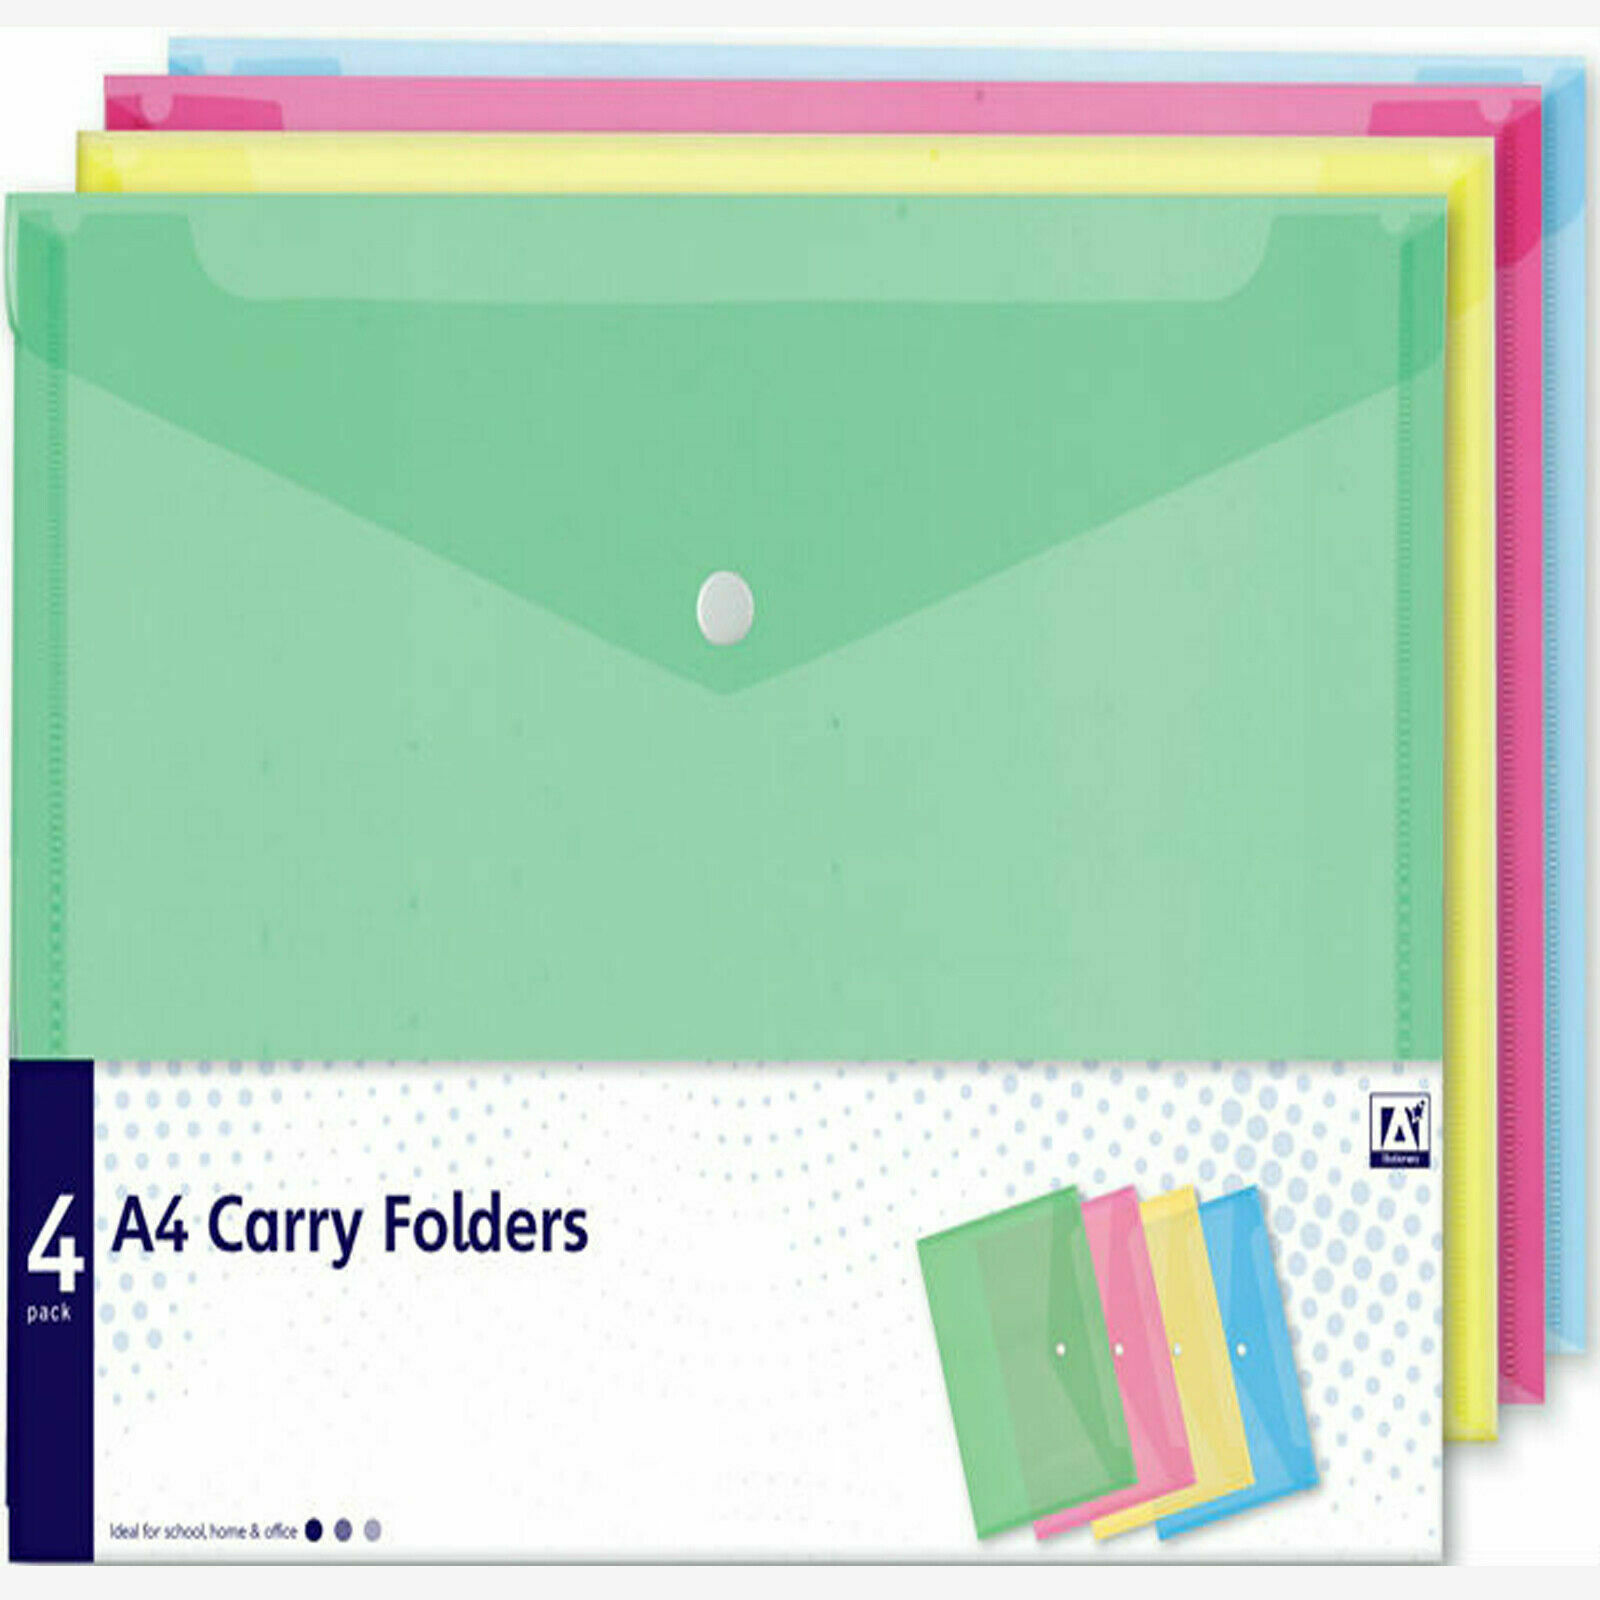 Office-School-Stationery-Mix-Colours-Document-Wallet-A4-Carry-Folders-4-Pack-254382343020.jpg